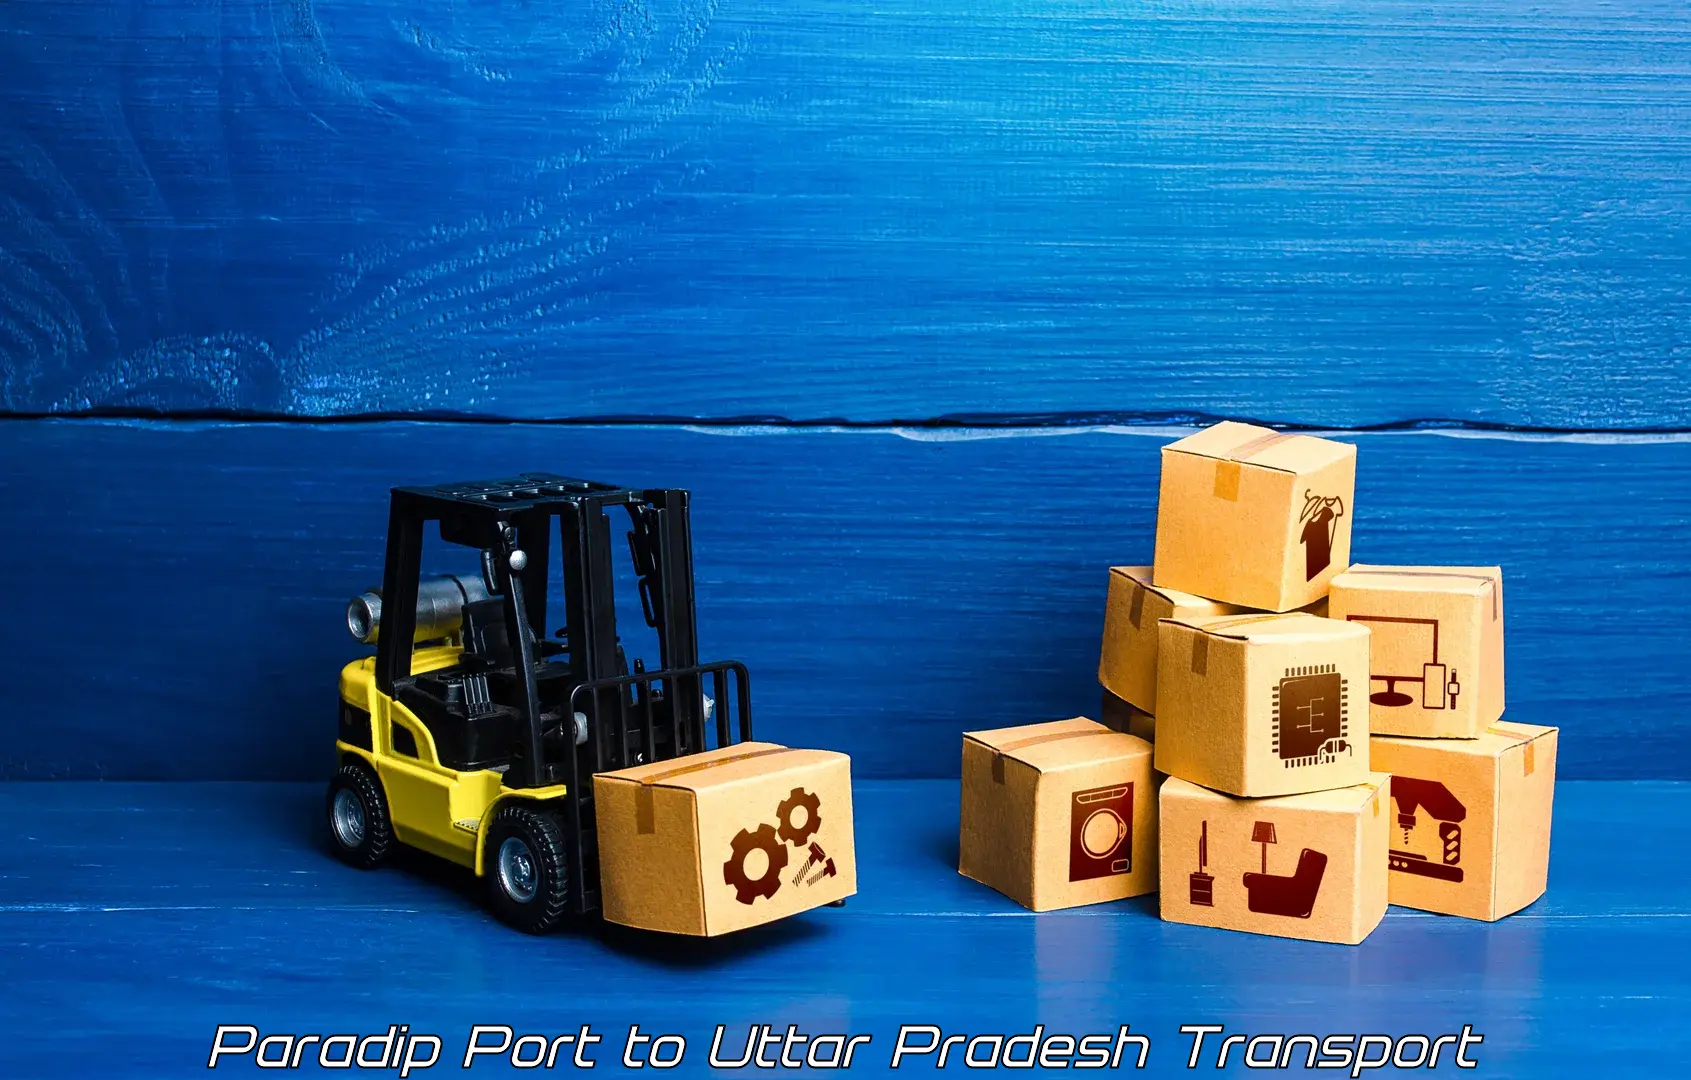 Online transport service Paradip Port to Bhadohi